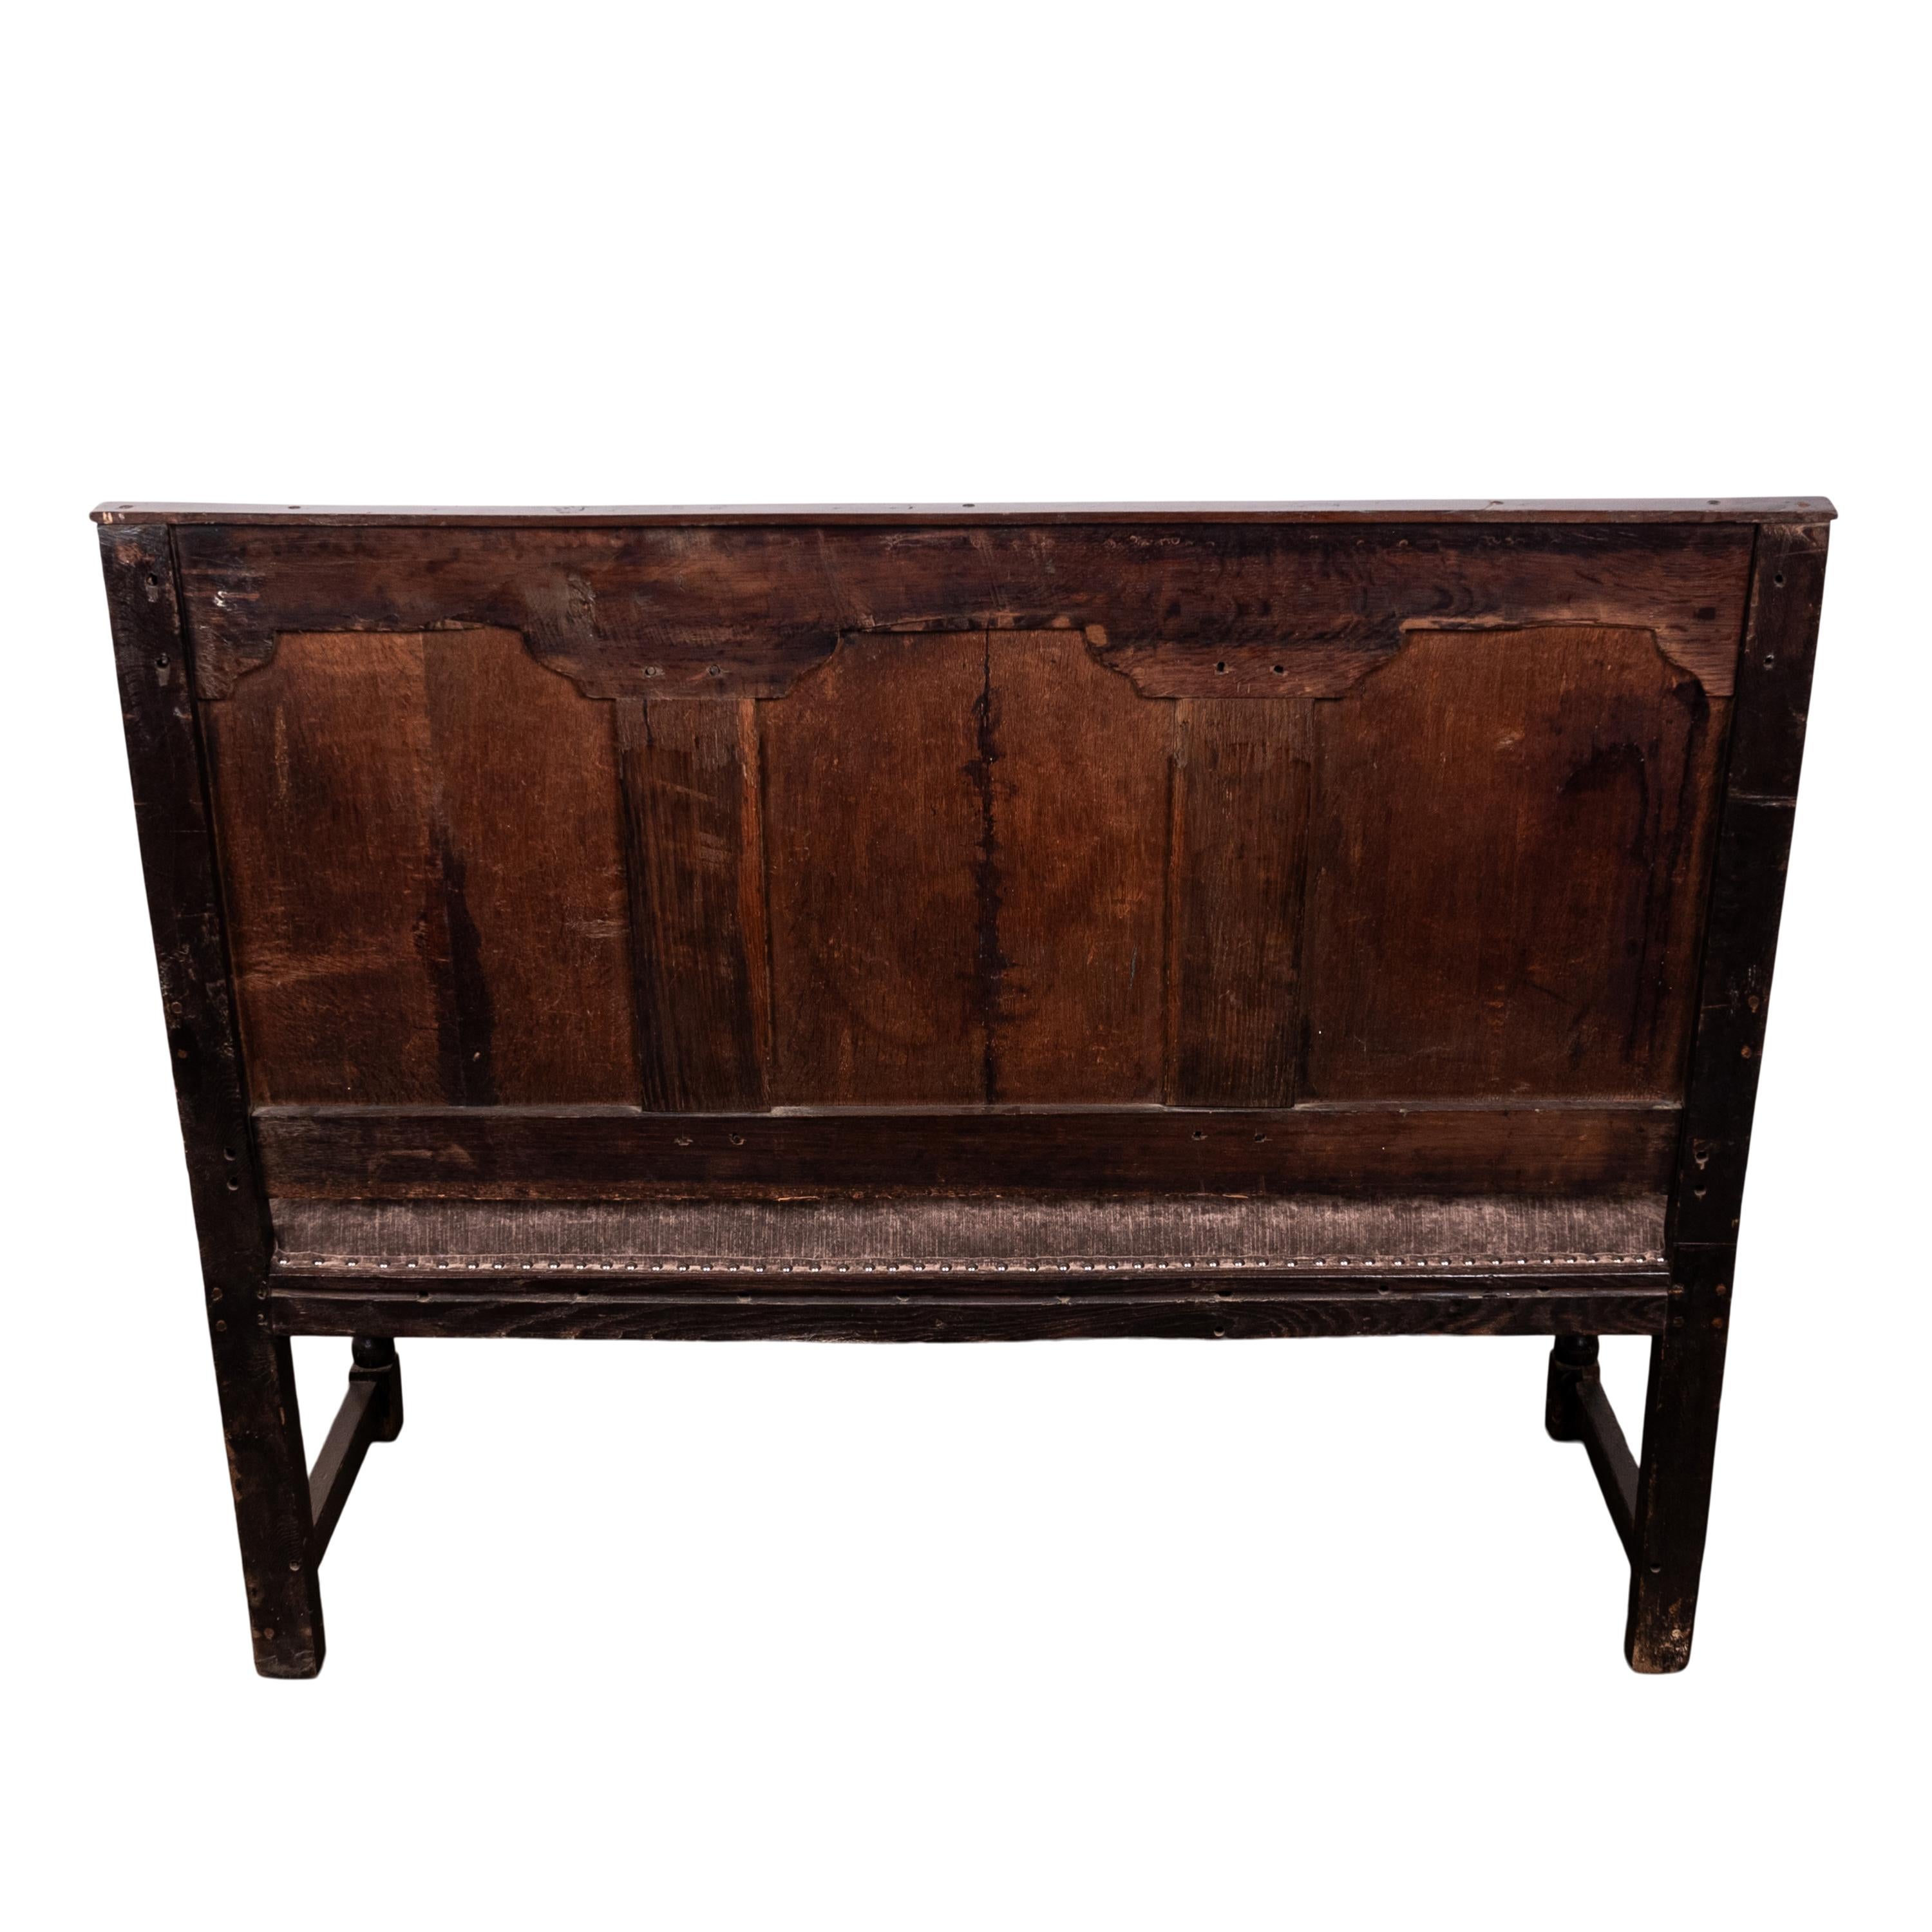 Antique English 17th Century King Charles II Carved Oak Settle Sofa Bench 1680 For Sale 8